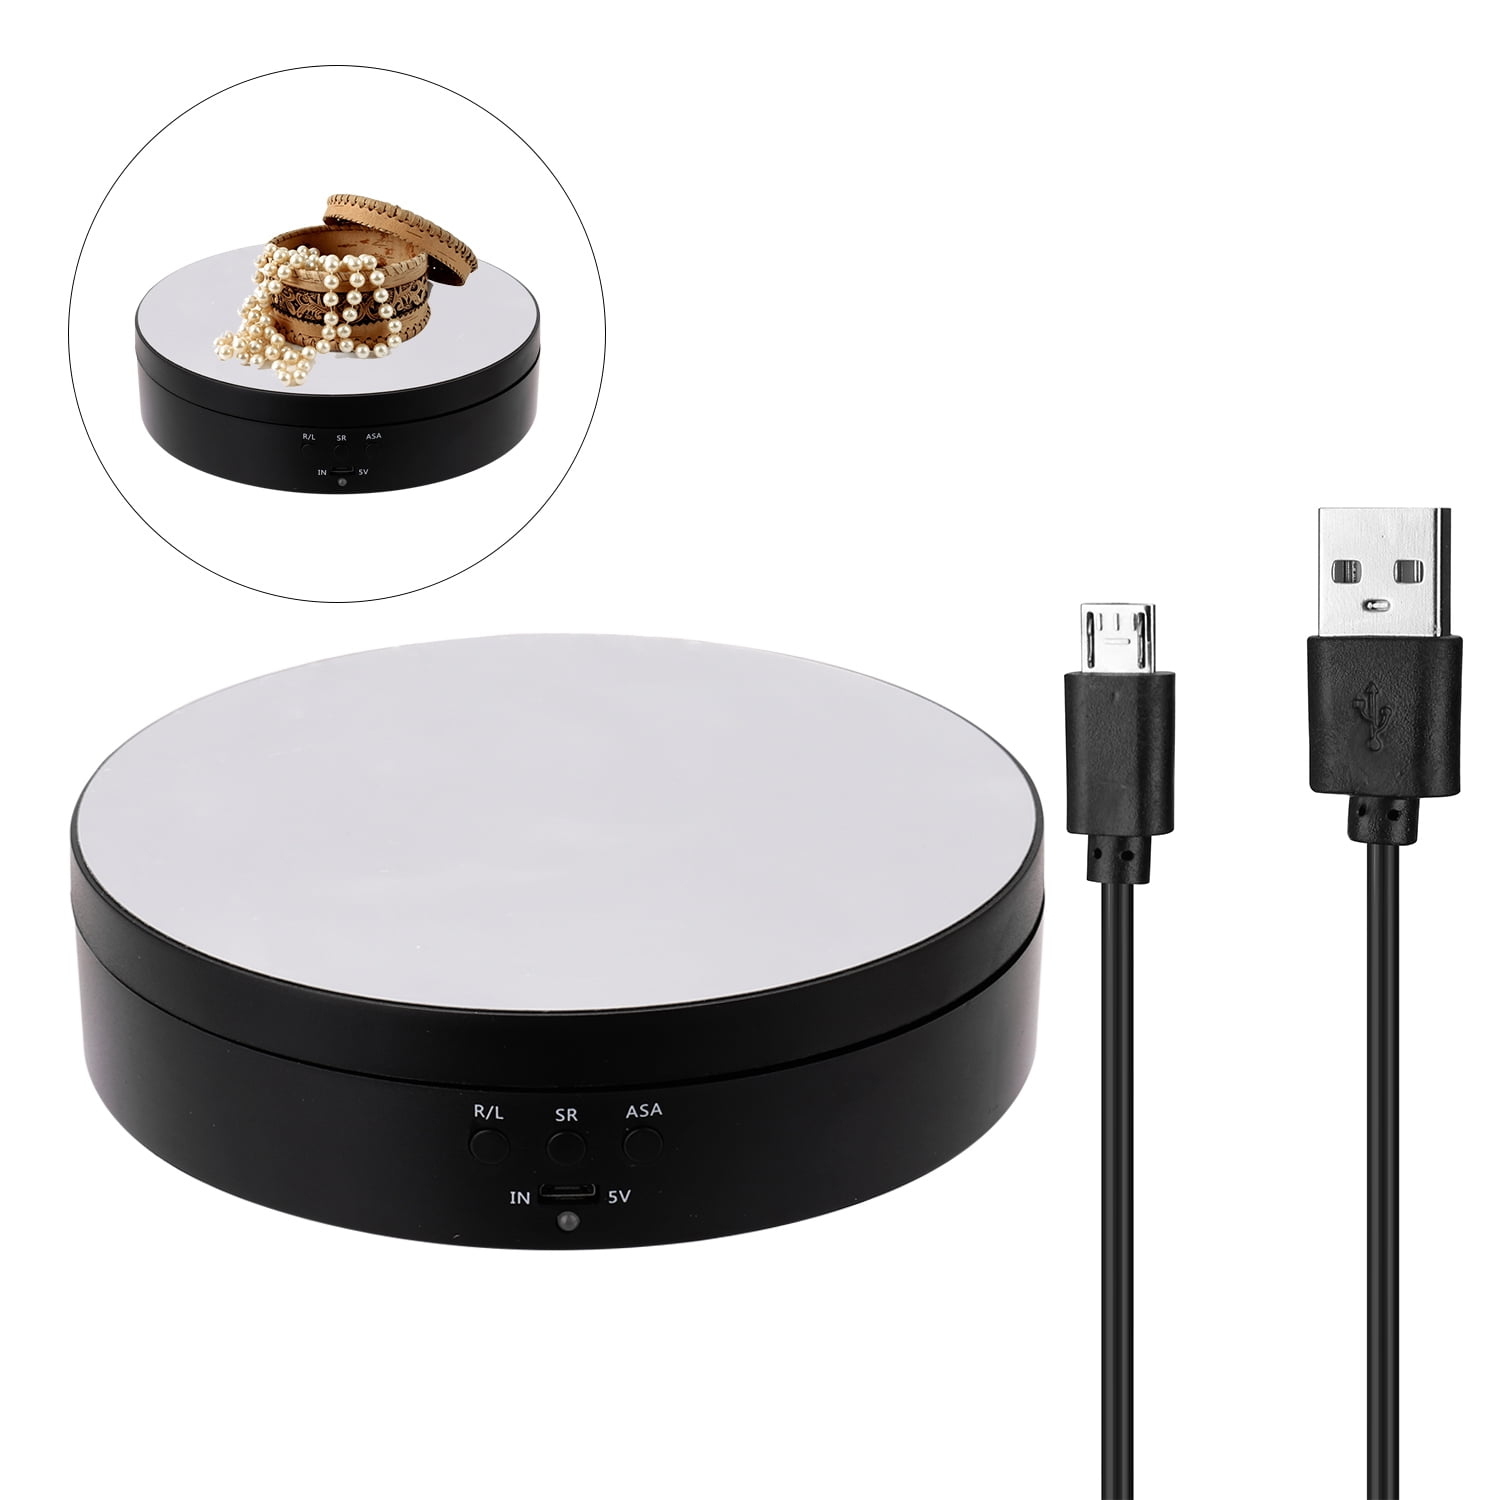 TINYSOME 20cm 360 Degree 5V Electric Auto-Rotation Photography Rotating  Turntable Display Stand Display Turntable (Black Mirror) 